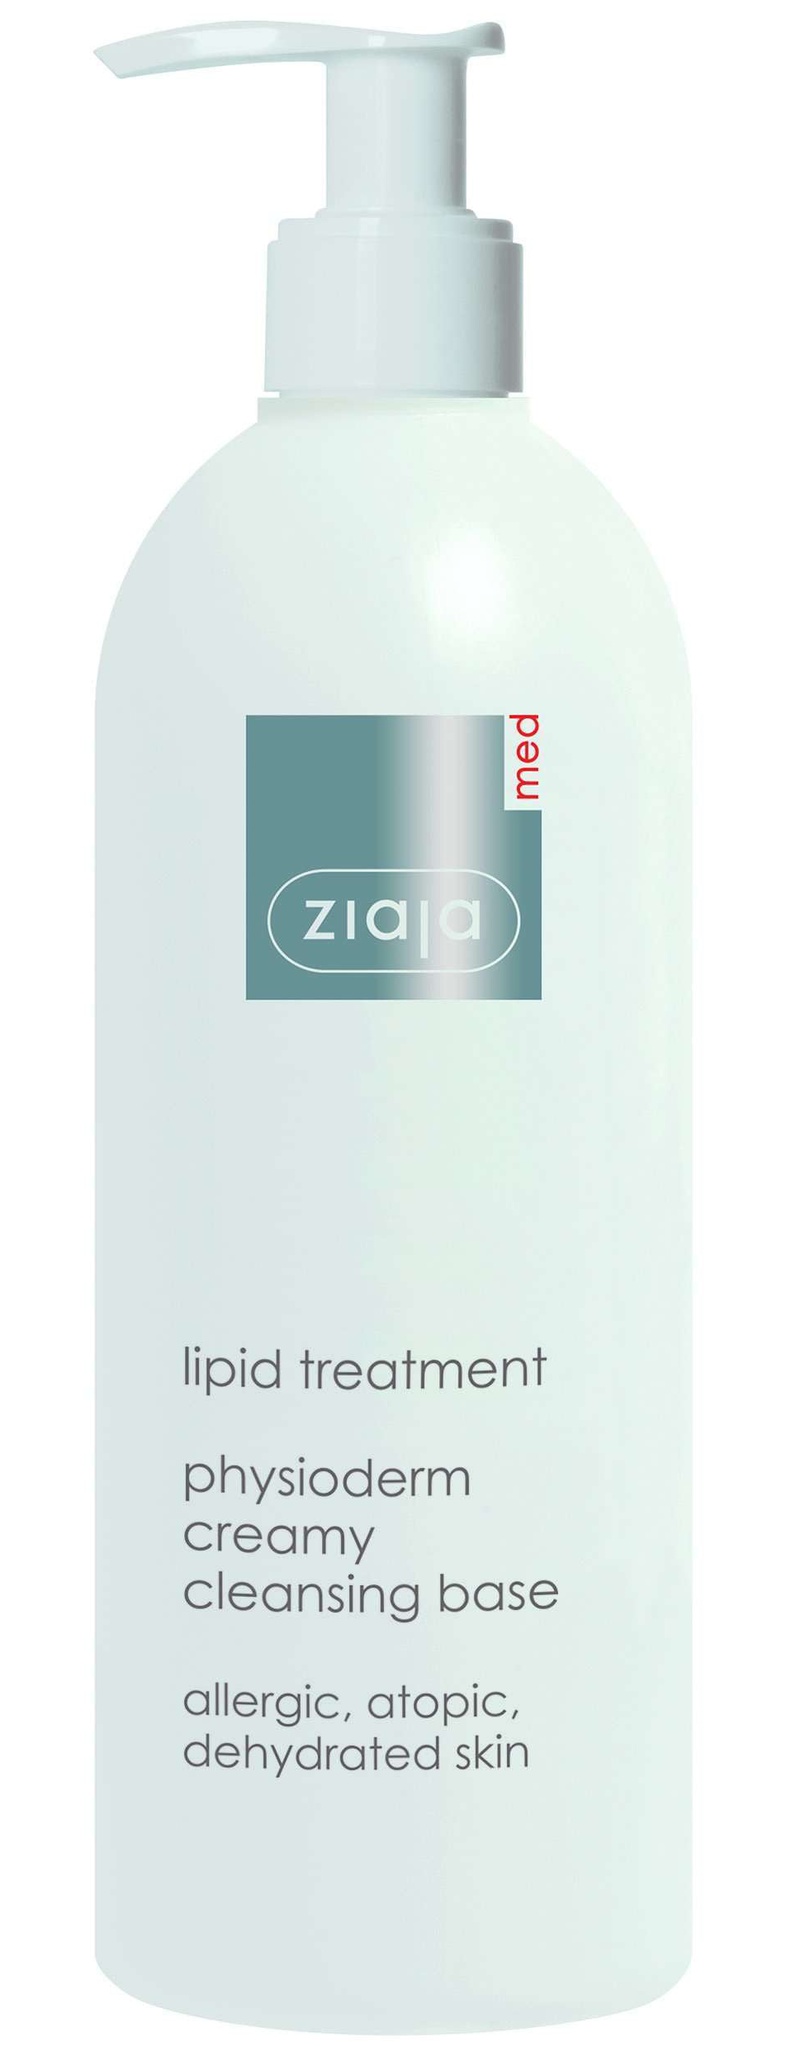 Ziaja Med Physioderm Creamy Cleansing Base